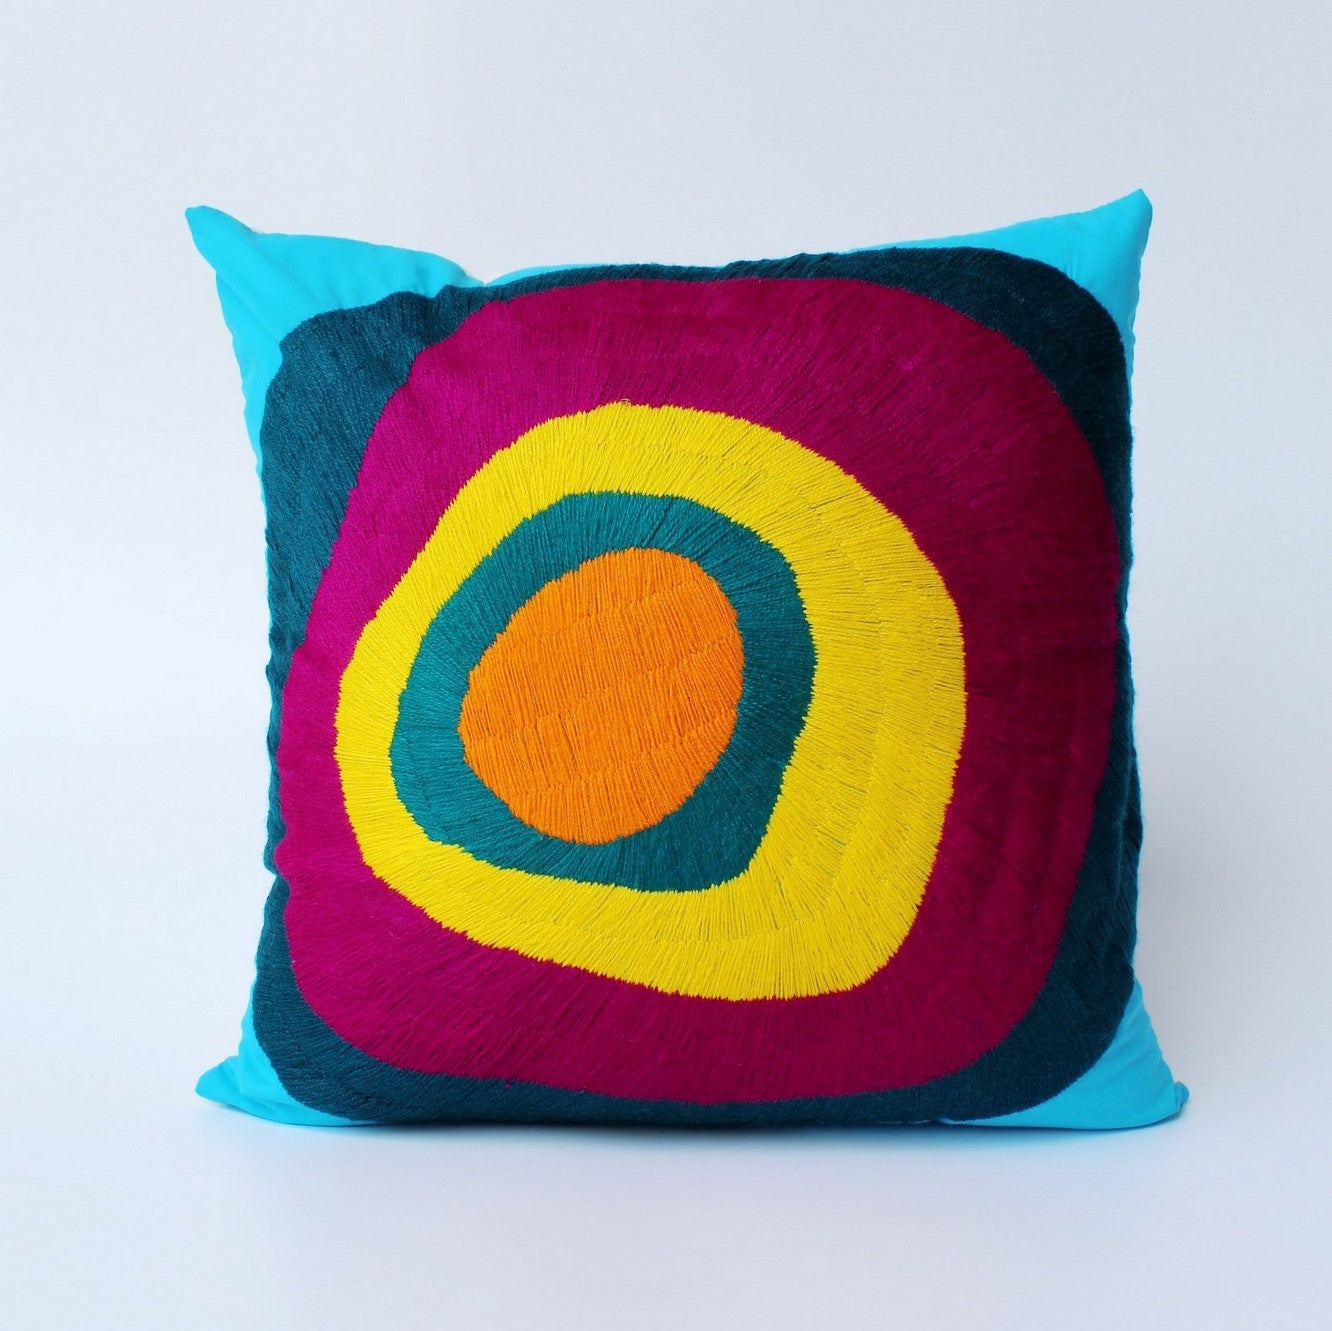 Embroidered pillow cover 16"x16" - Circles WHITE